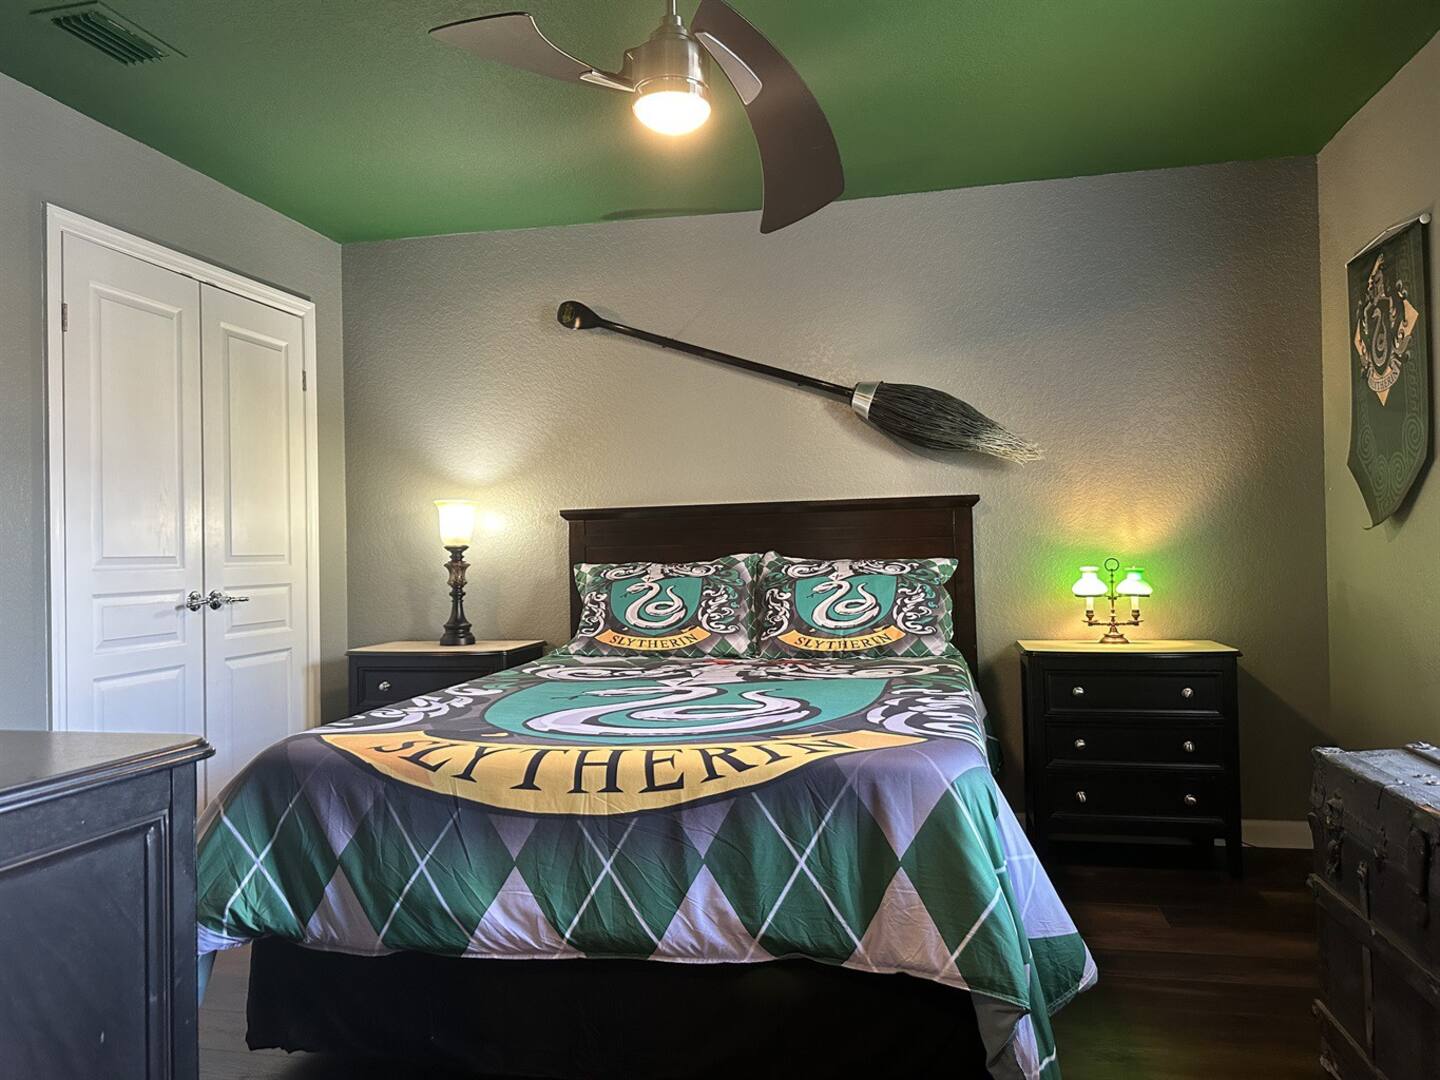 The Slytherin bedroom has a queen-size bed with a Nimbus 2001 overhead.